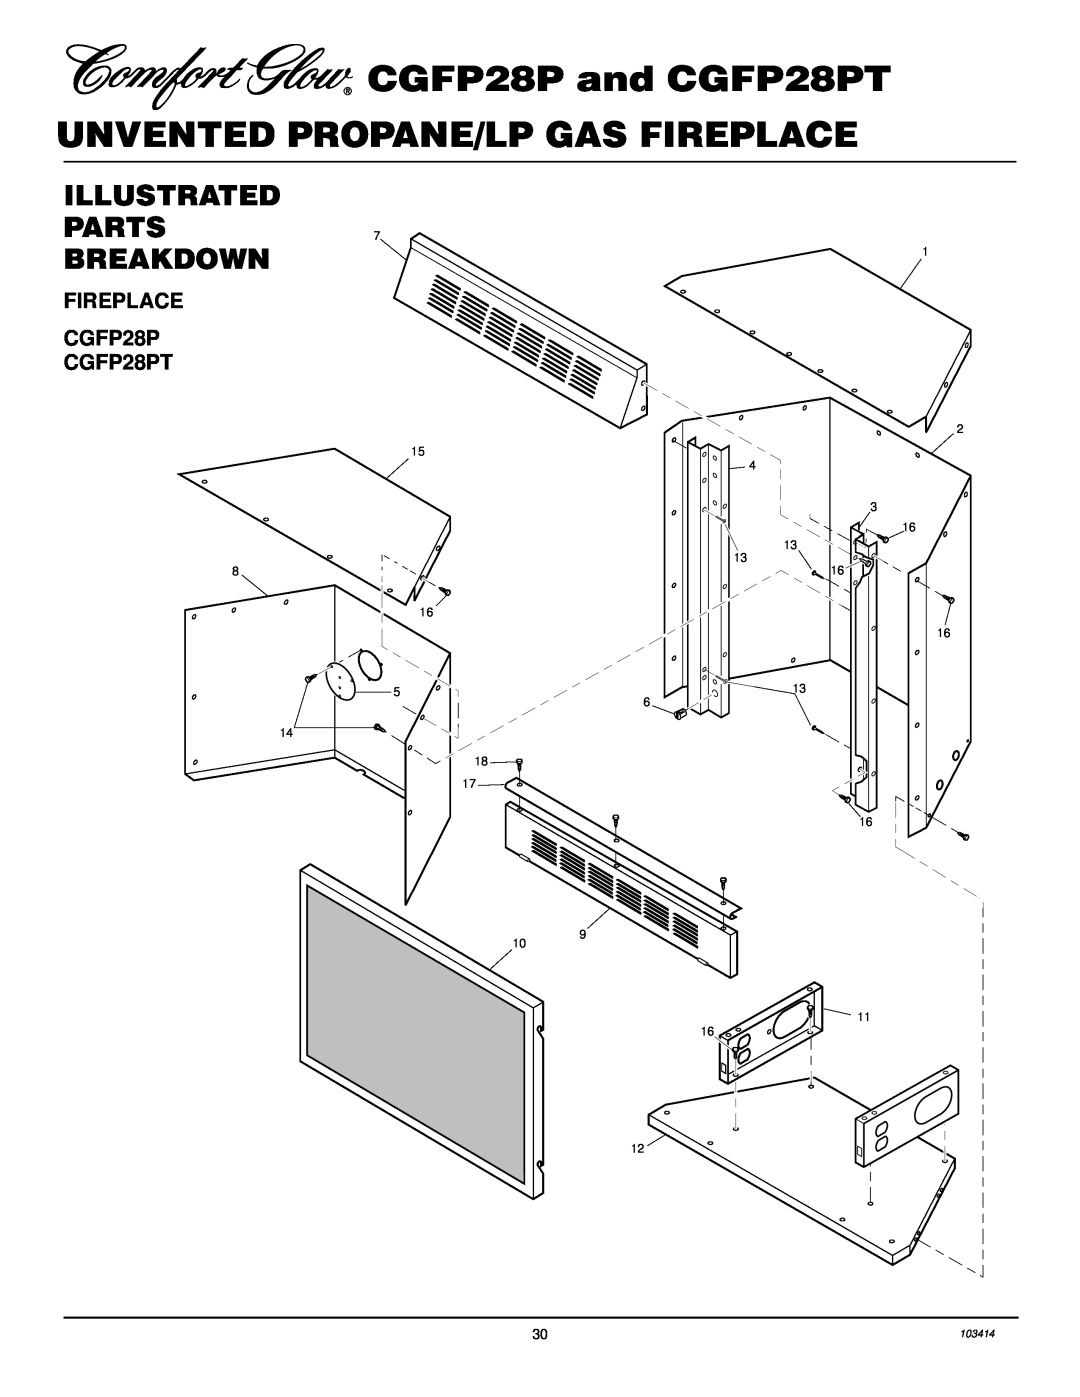 Desa CGFP28P and CGFP28PT, Unvented Propane/Lp Gas Fireplace, Illustrated, Parts, Breakdown, 6 14 18 17 16 9 